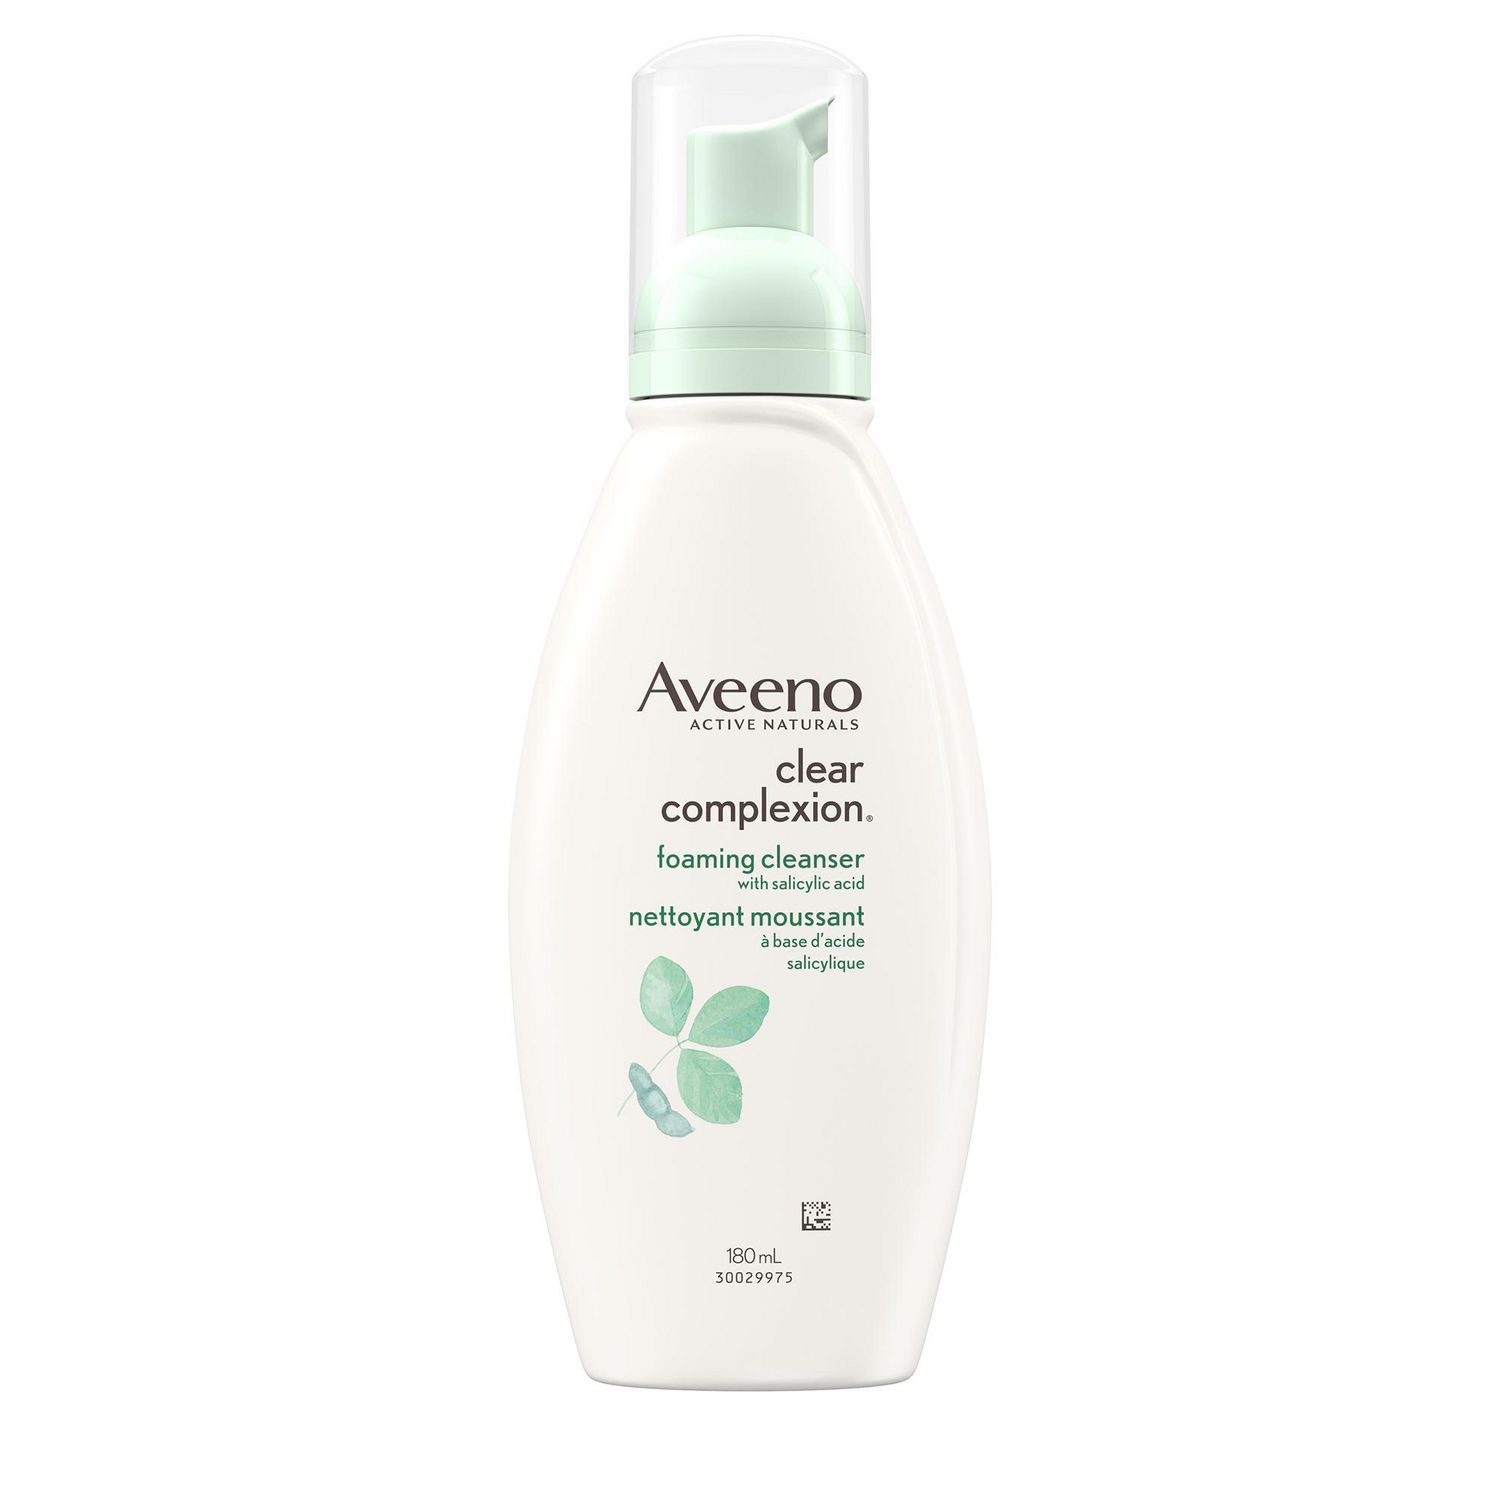 Aveeno Active Naturals Clear Complexion Foaming Cleanser with Salicylic Acid 180mL